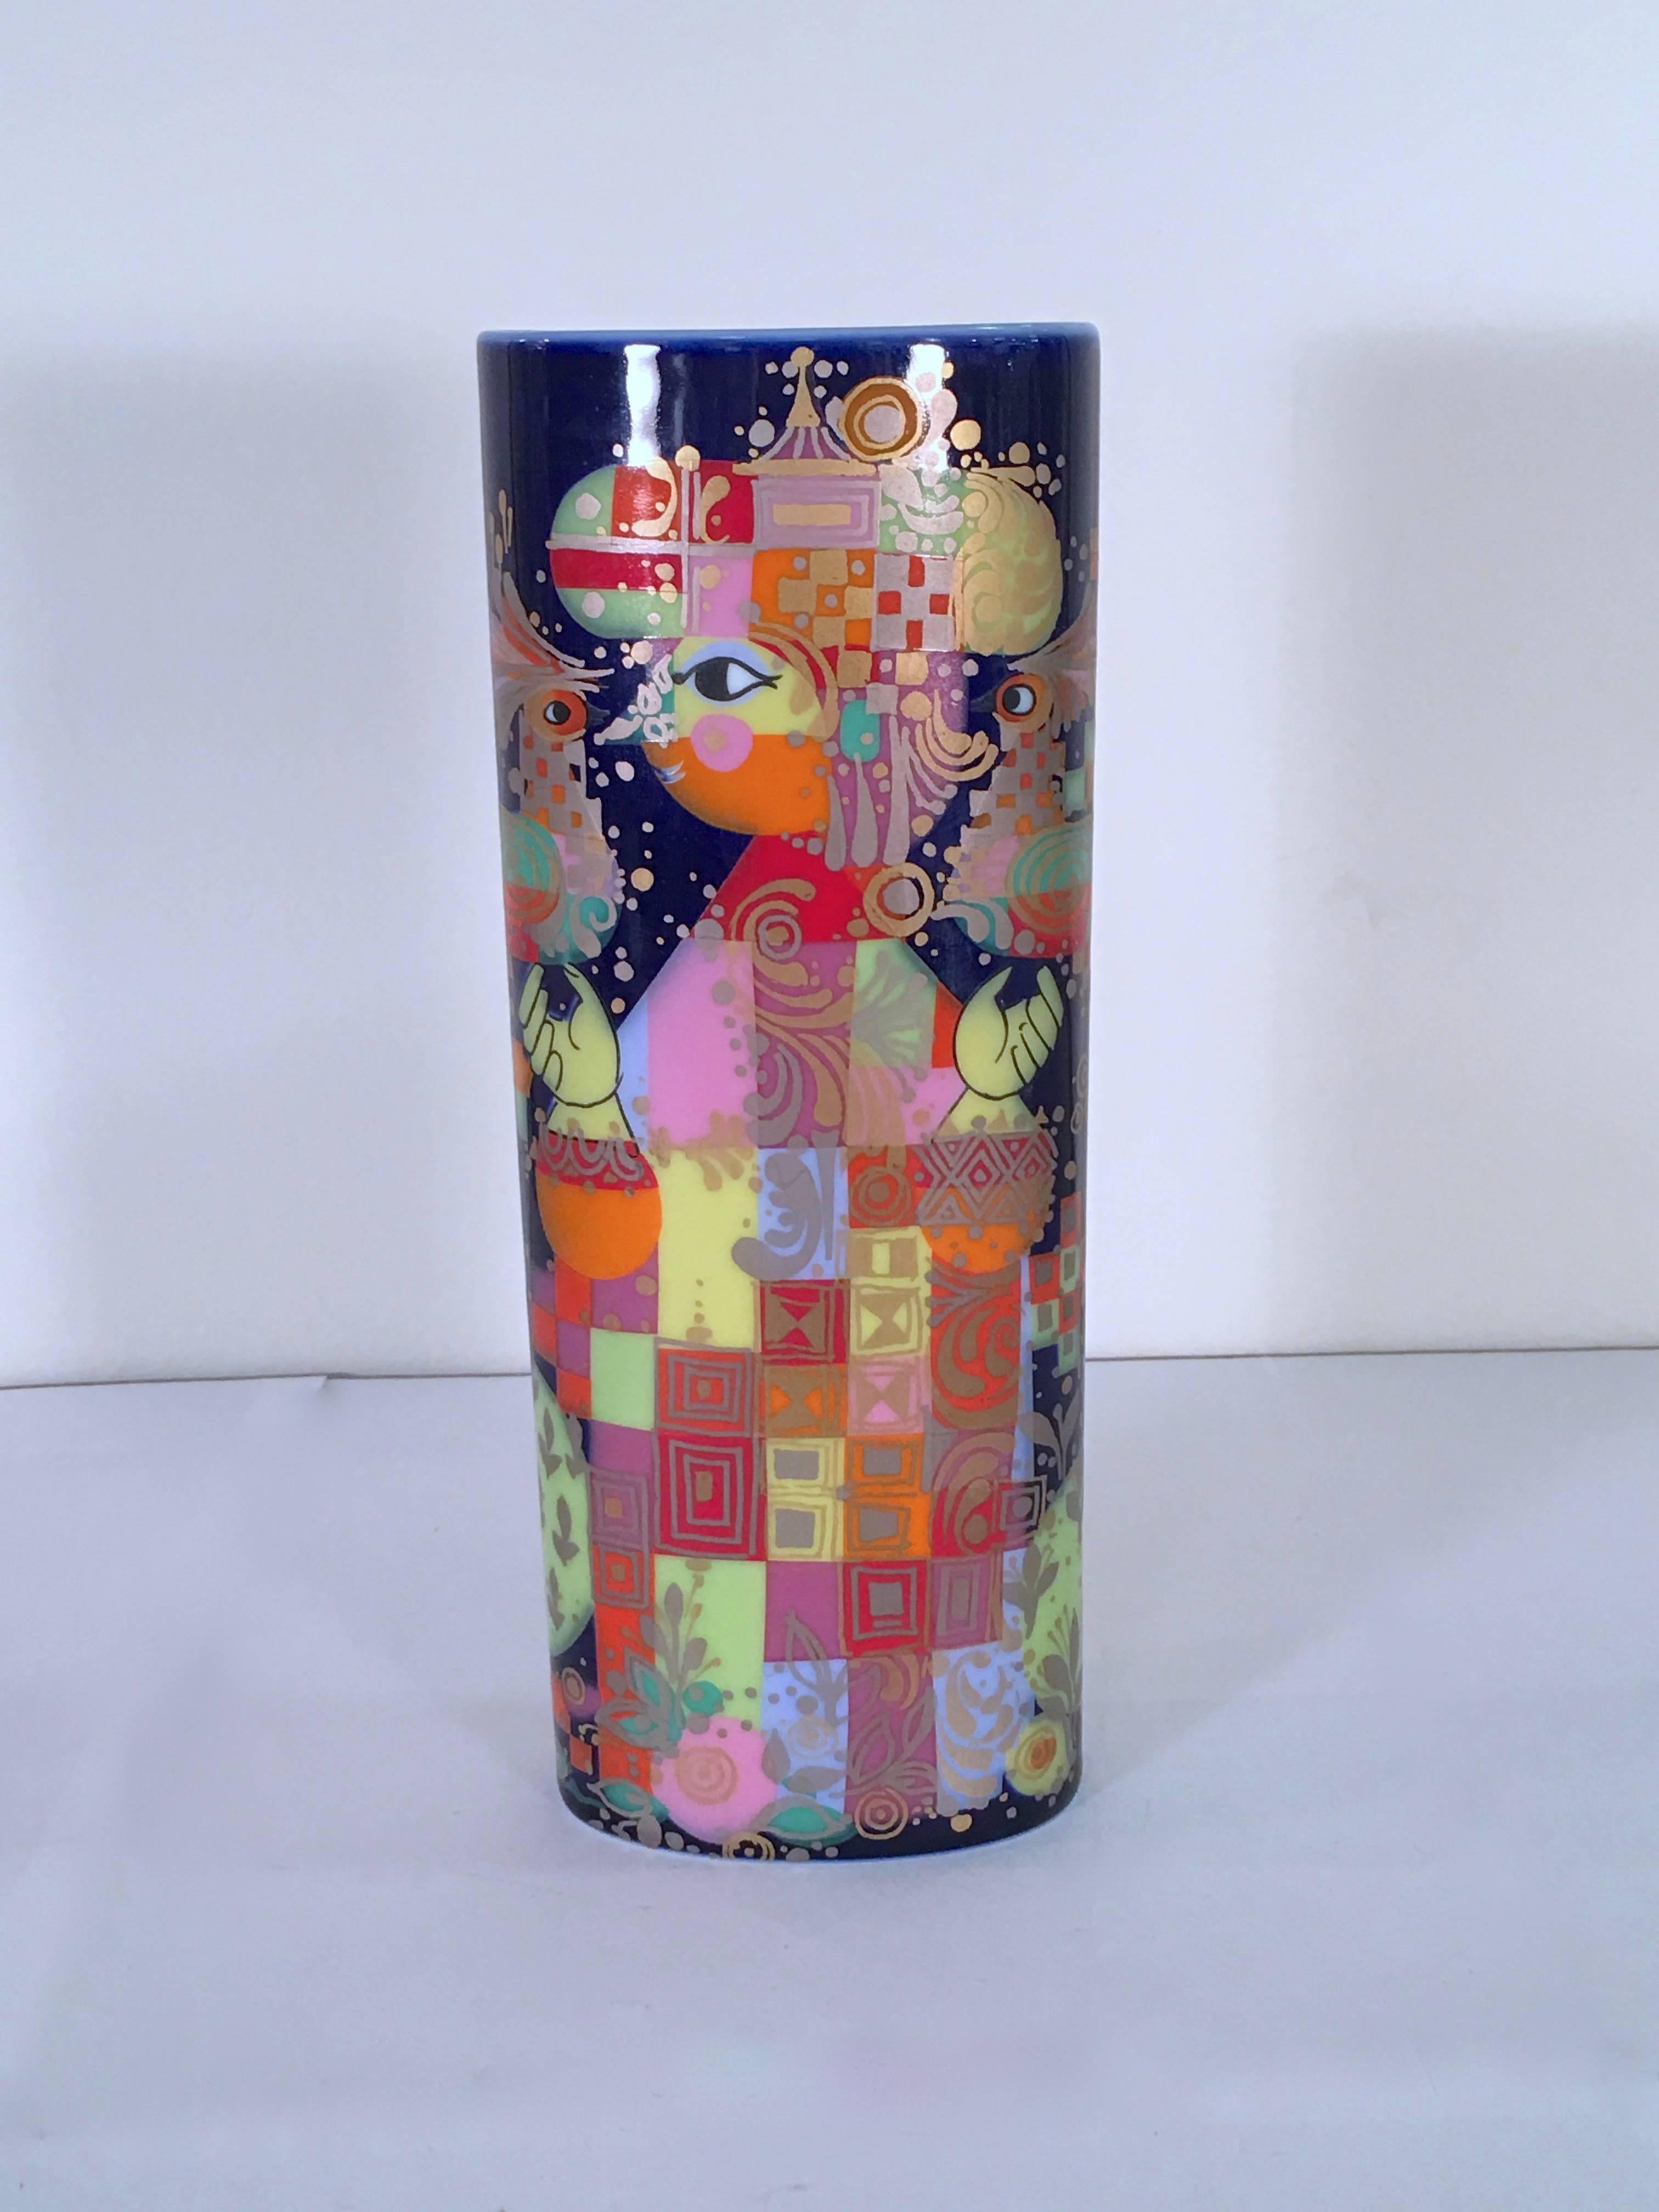 Wonderful vase by Bjorn Wiinblad for Rosenthal from his 1001 nights series. The vase is adorned with gold and jewel like colors and is a fine example of Wiinblad's charming and magical oeuvre. Please contact for location. 